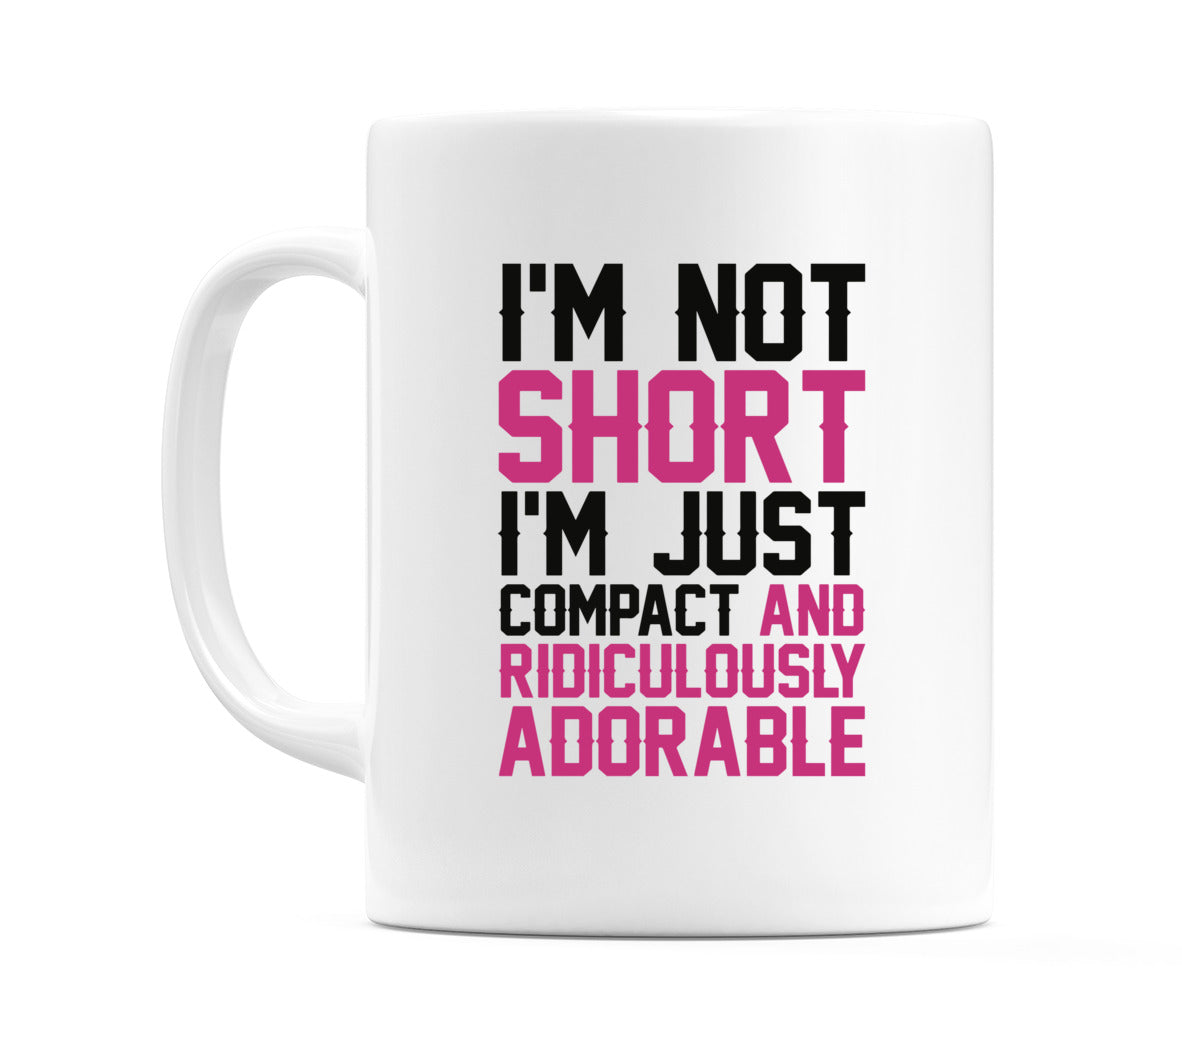 I'm Not Short I'm Just Compact And Ridiculously Adorable Mug